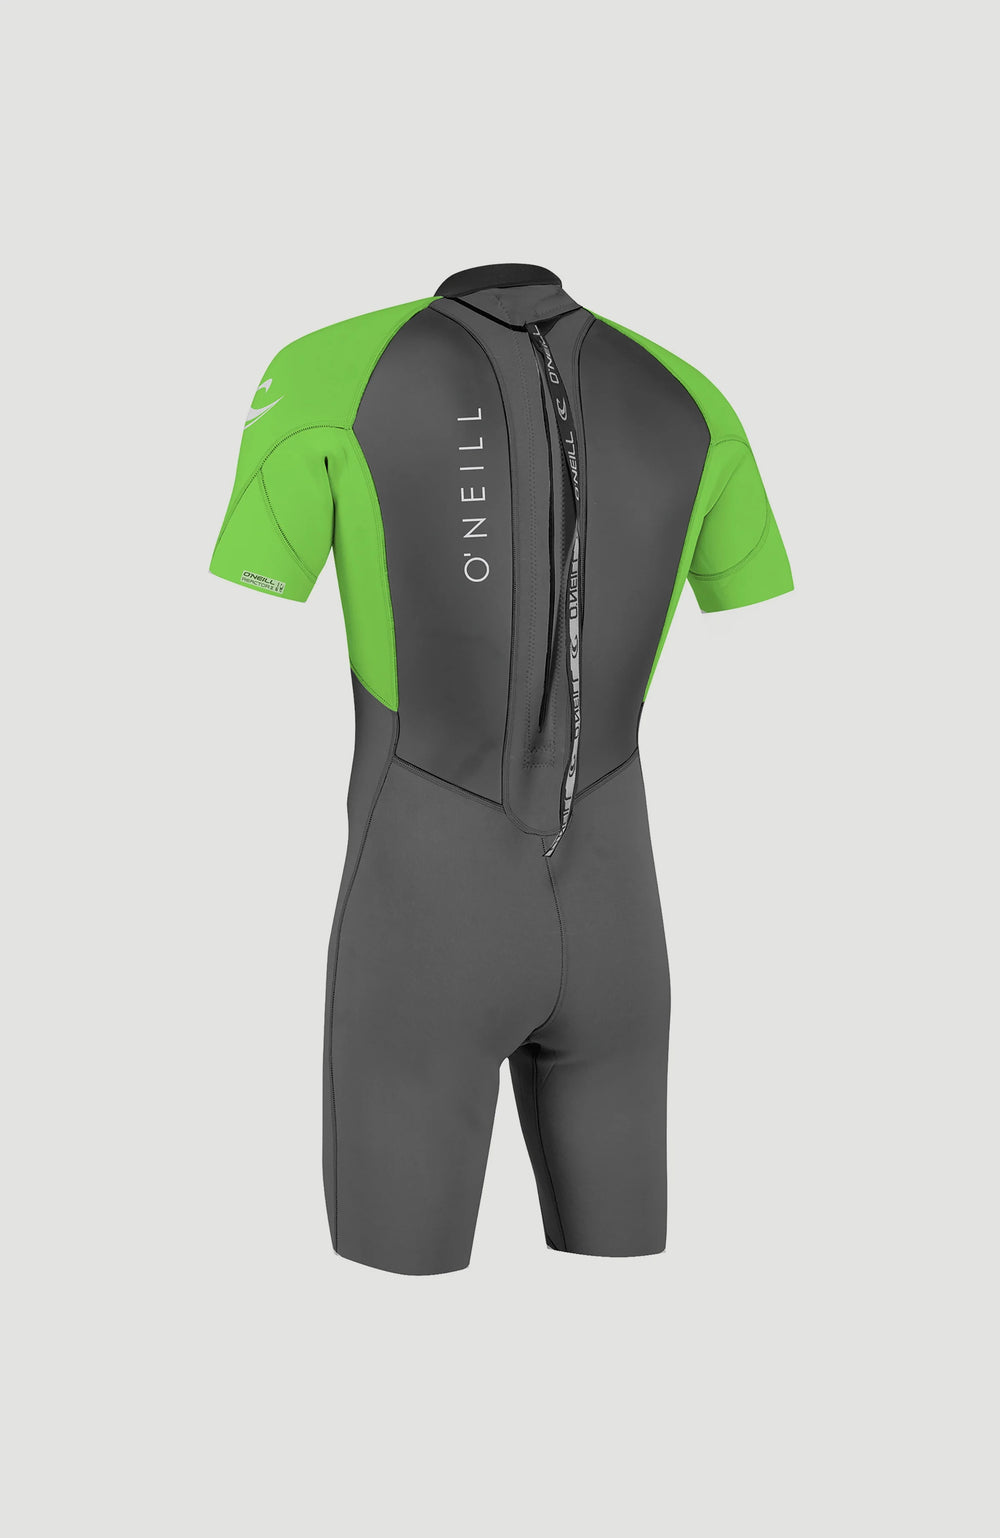 O'Neill Reactor-2 BZ 2mm Men's Spring Shorty Wetsuit - Graphite/Dayglo - 5041